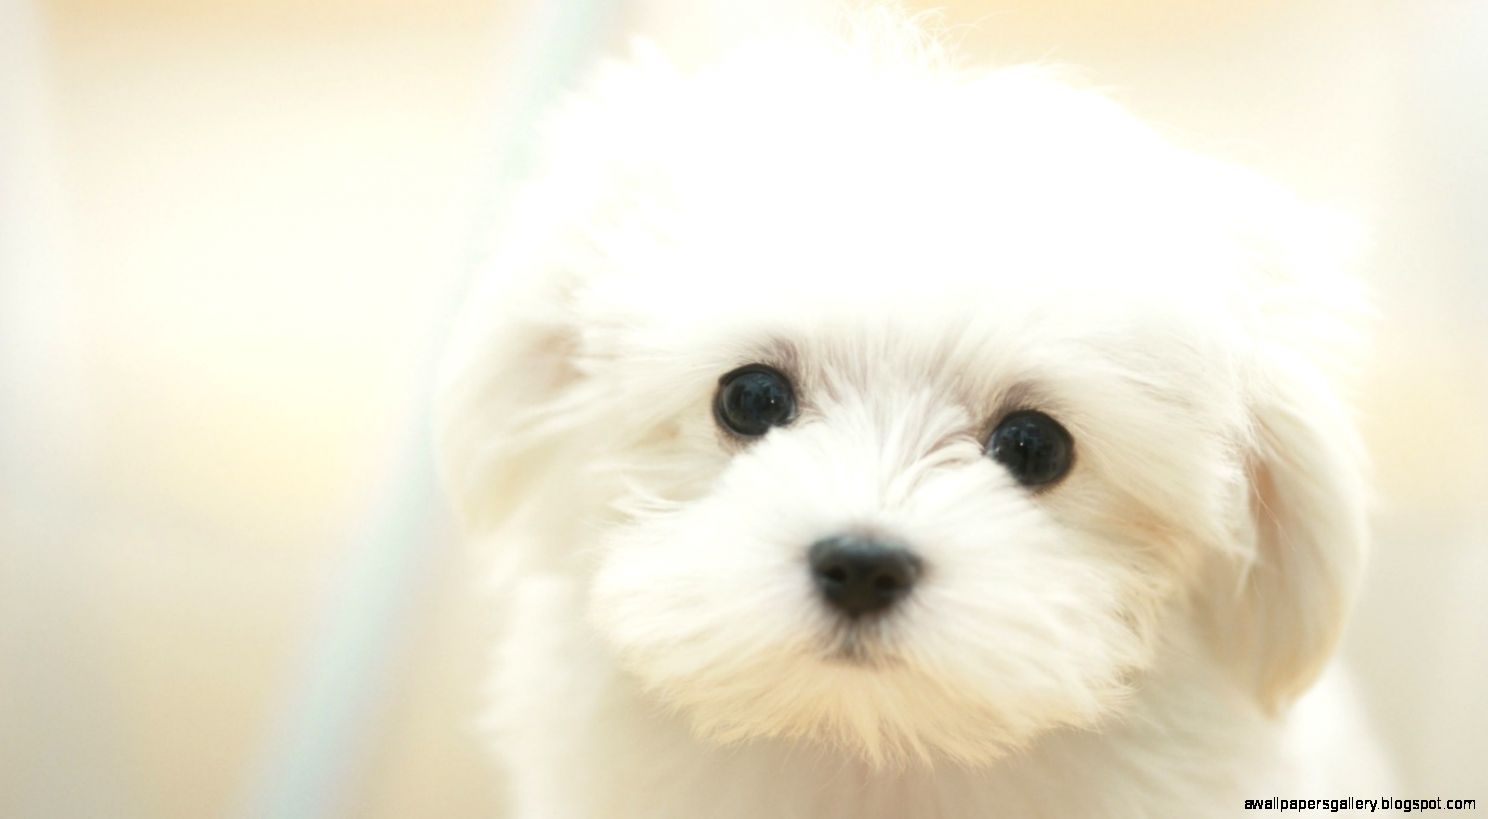 Cute Puppy Wallpaper | Wallpapers Gallery